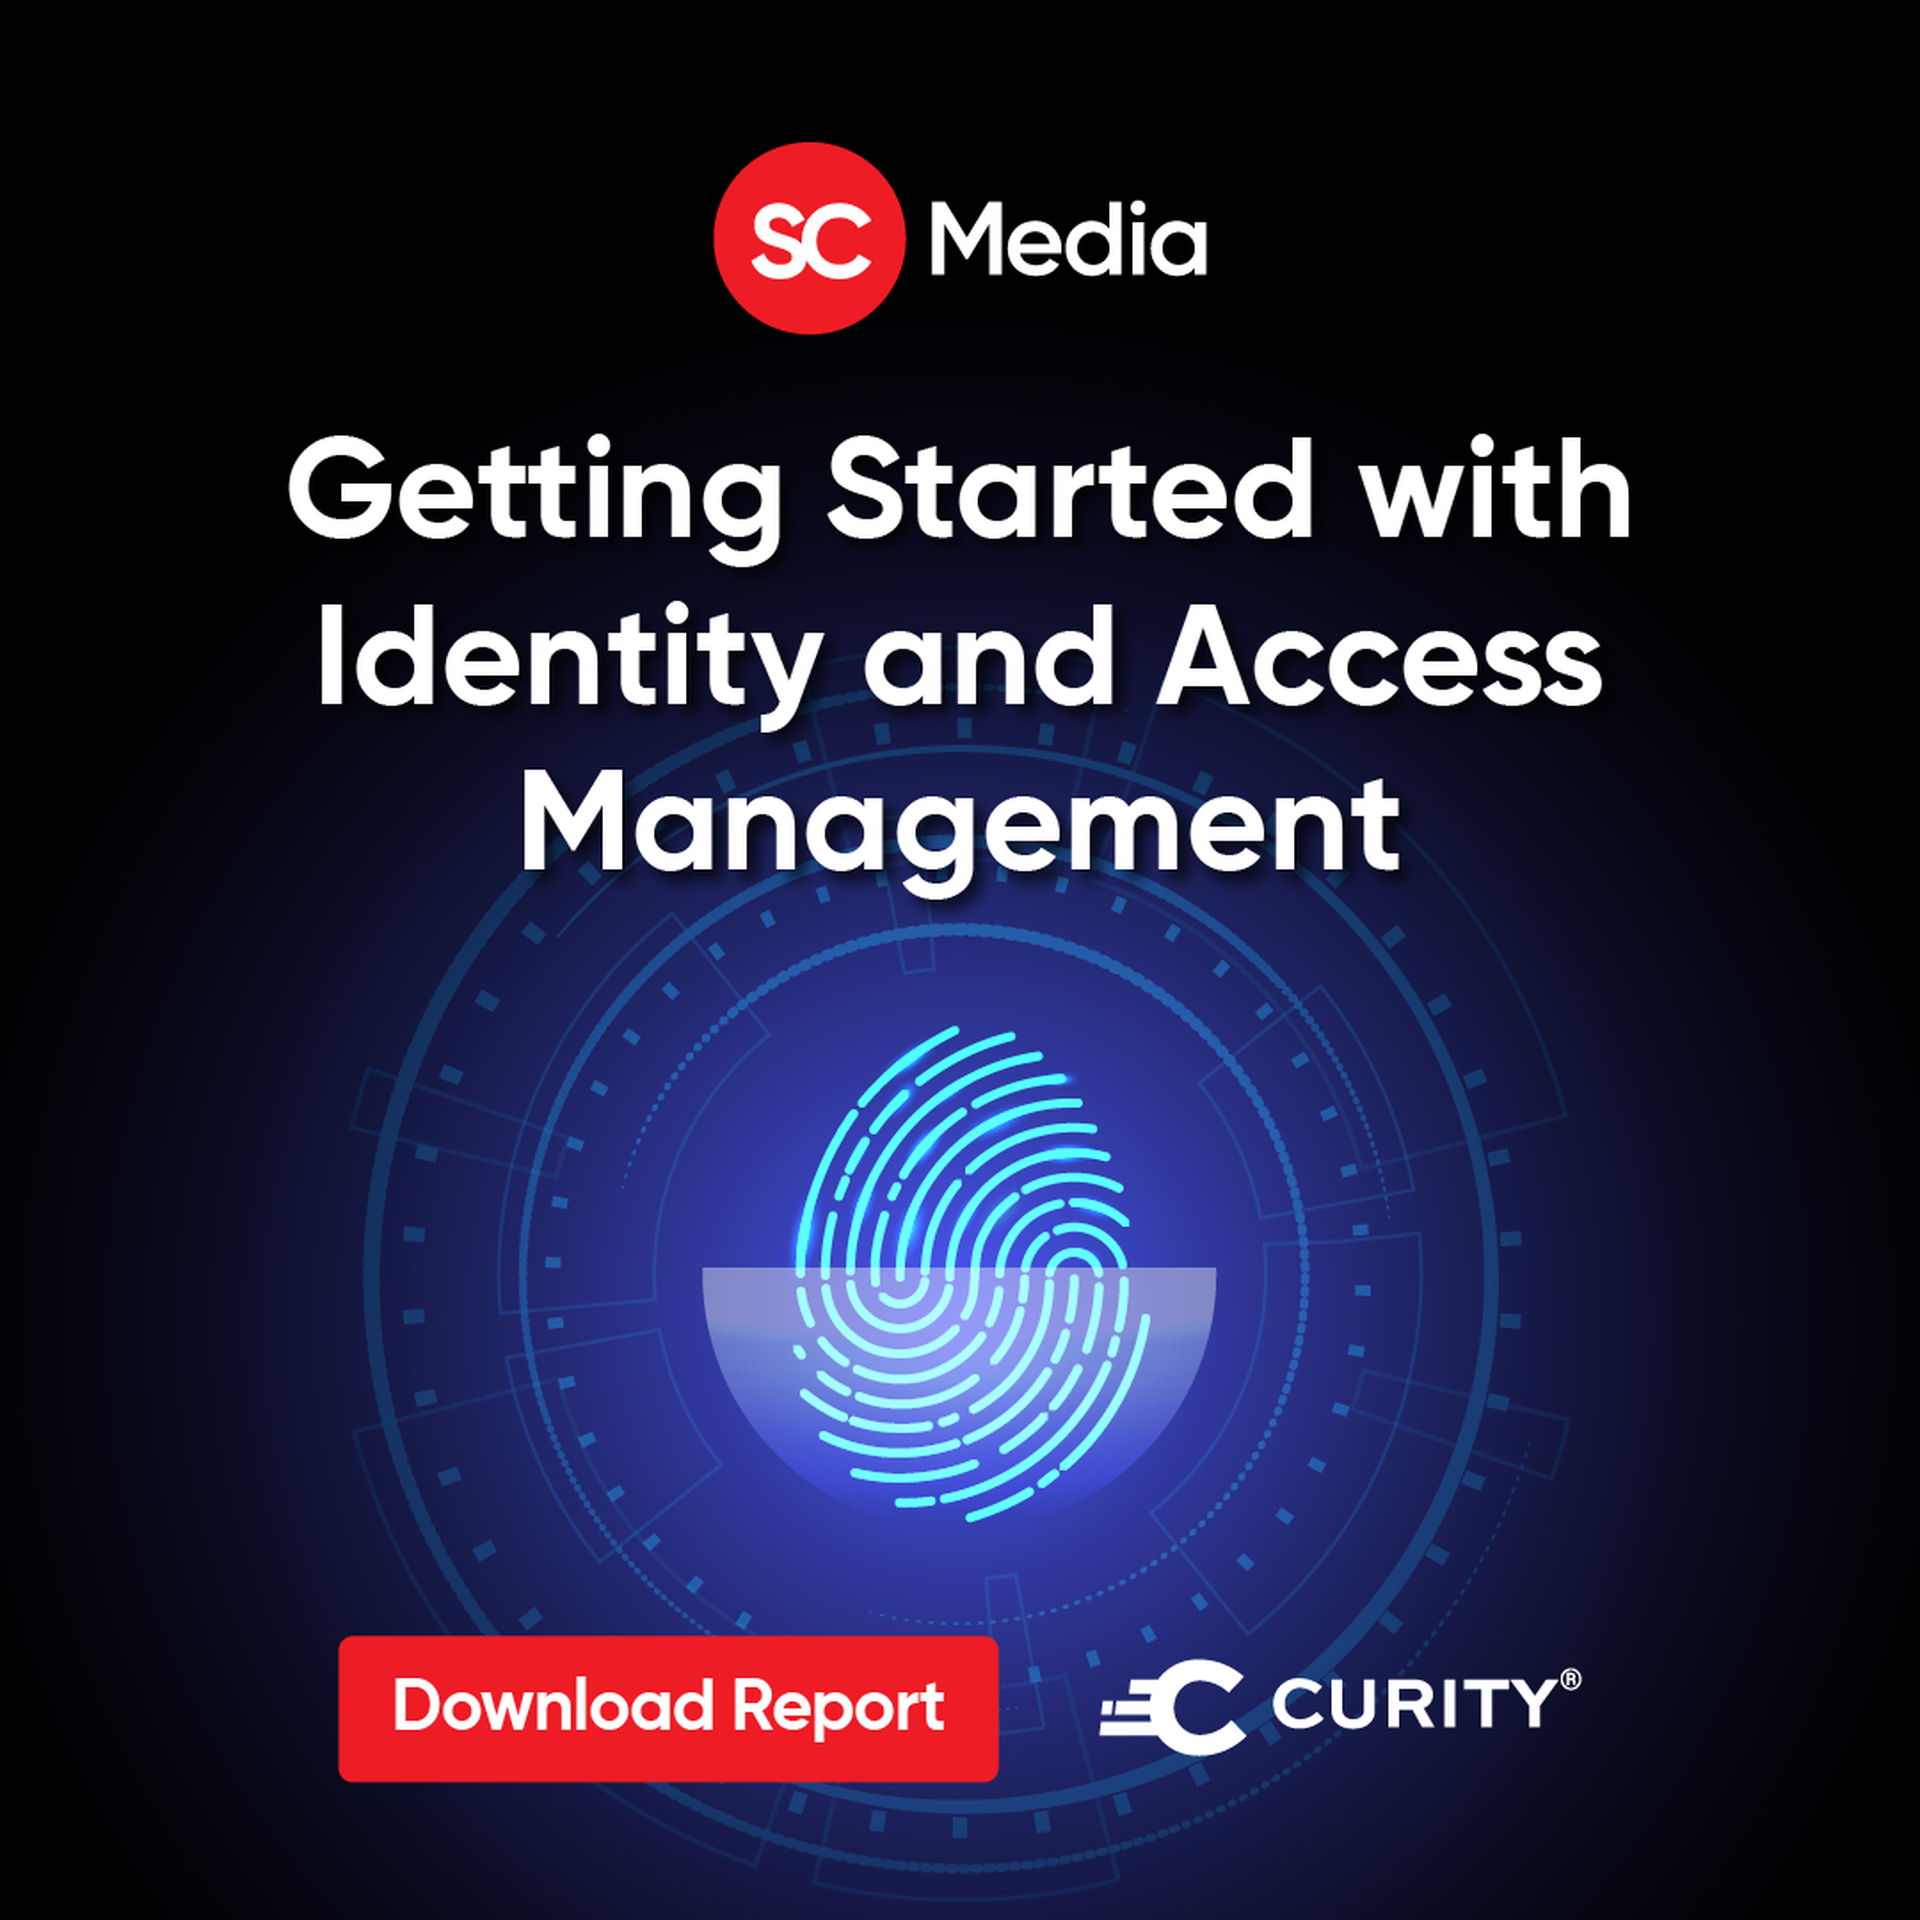 Getting Started with Identity and Access Management